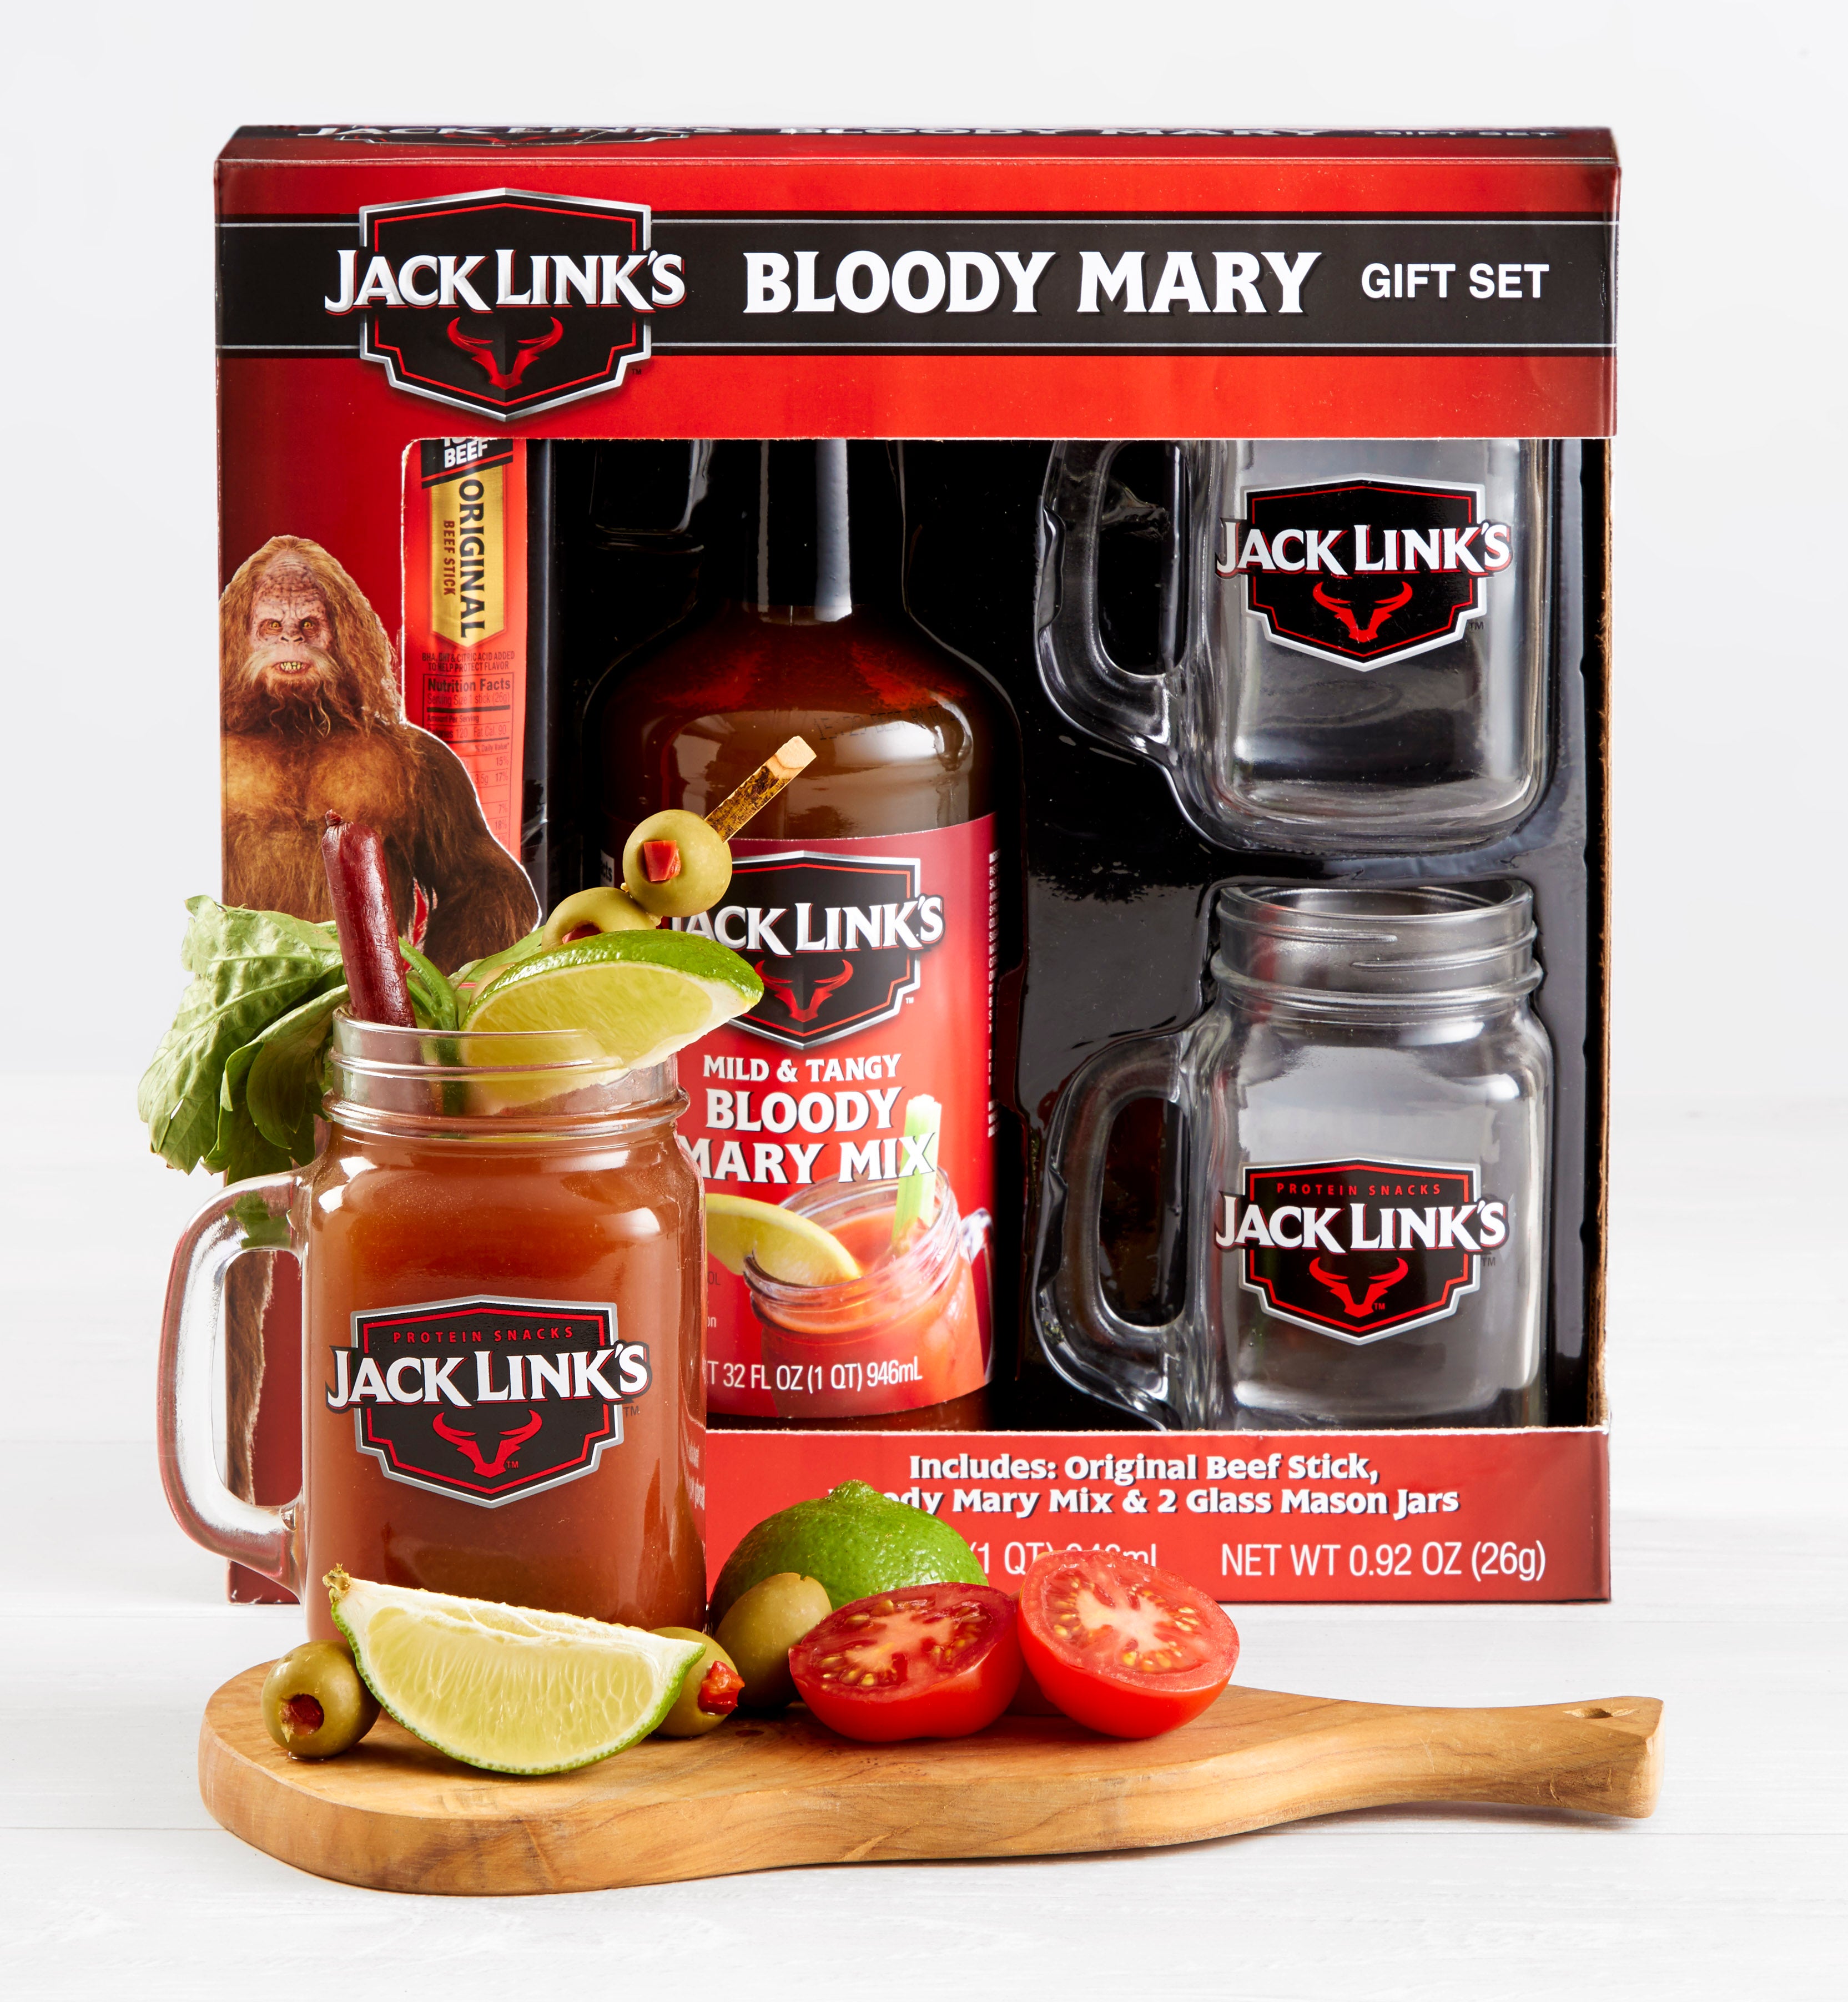 Jack Link's Bloody Mary Gift Set